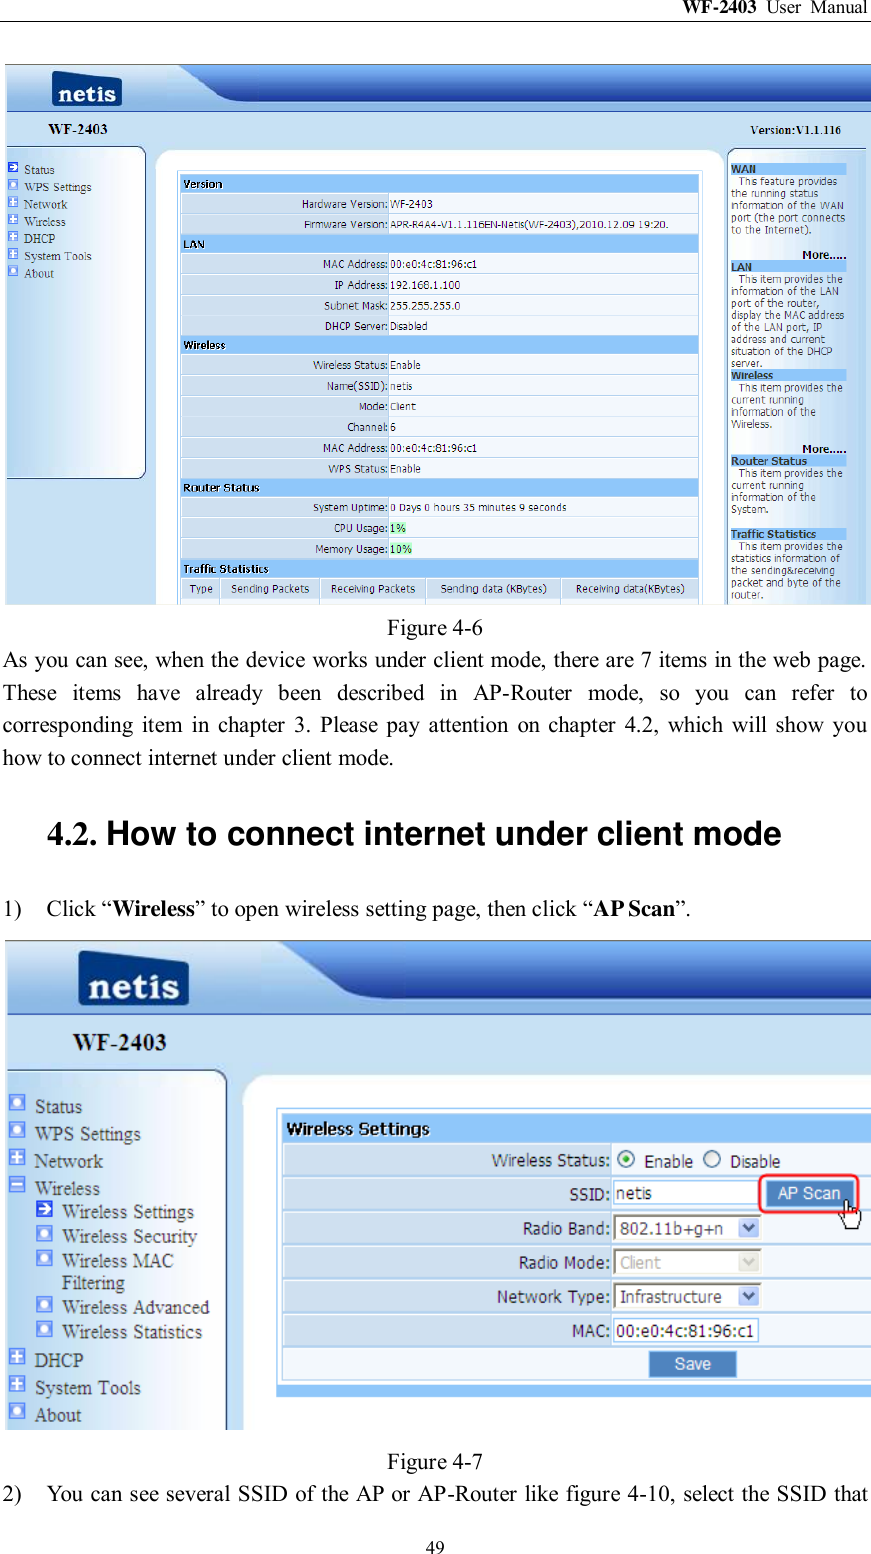 WF-2403  User  Manual  49  Figure 4-6 As you can see, when the device works under client mode, there are 7 items in the web page. These  items  have  already  been  described  in  AP-Router  mode,  so  you  can  refer  to corresponding  item  in  chapter  3.  Please  pay  attention  on  chapter  4.2,  which  will  show  you how to connect internet under client mode. 4.2. How to connect internet under client mode 1) Click “Wireless” to open wireless setting page, then click “AP Scan”.  Figure 4-7 2) You can see several SSID of the AP or AP-Router like figure 4-10, select the SSID that 